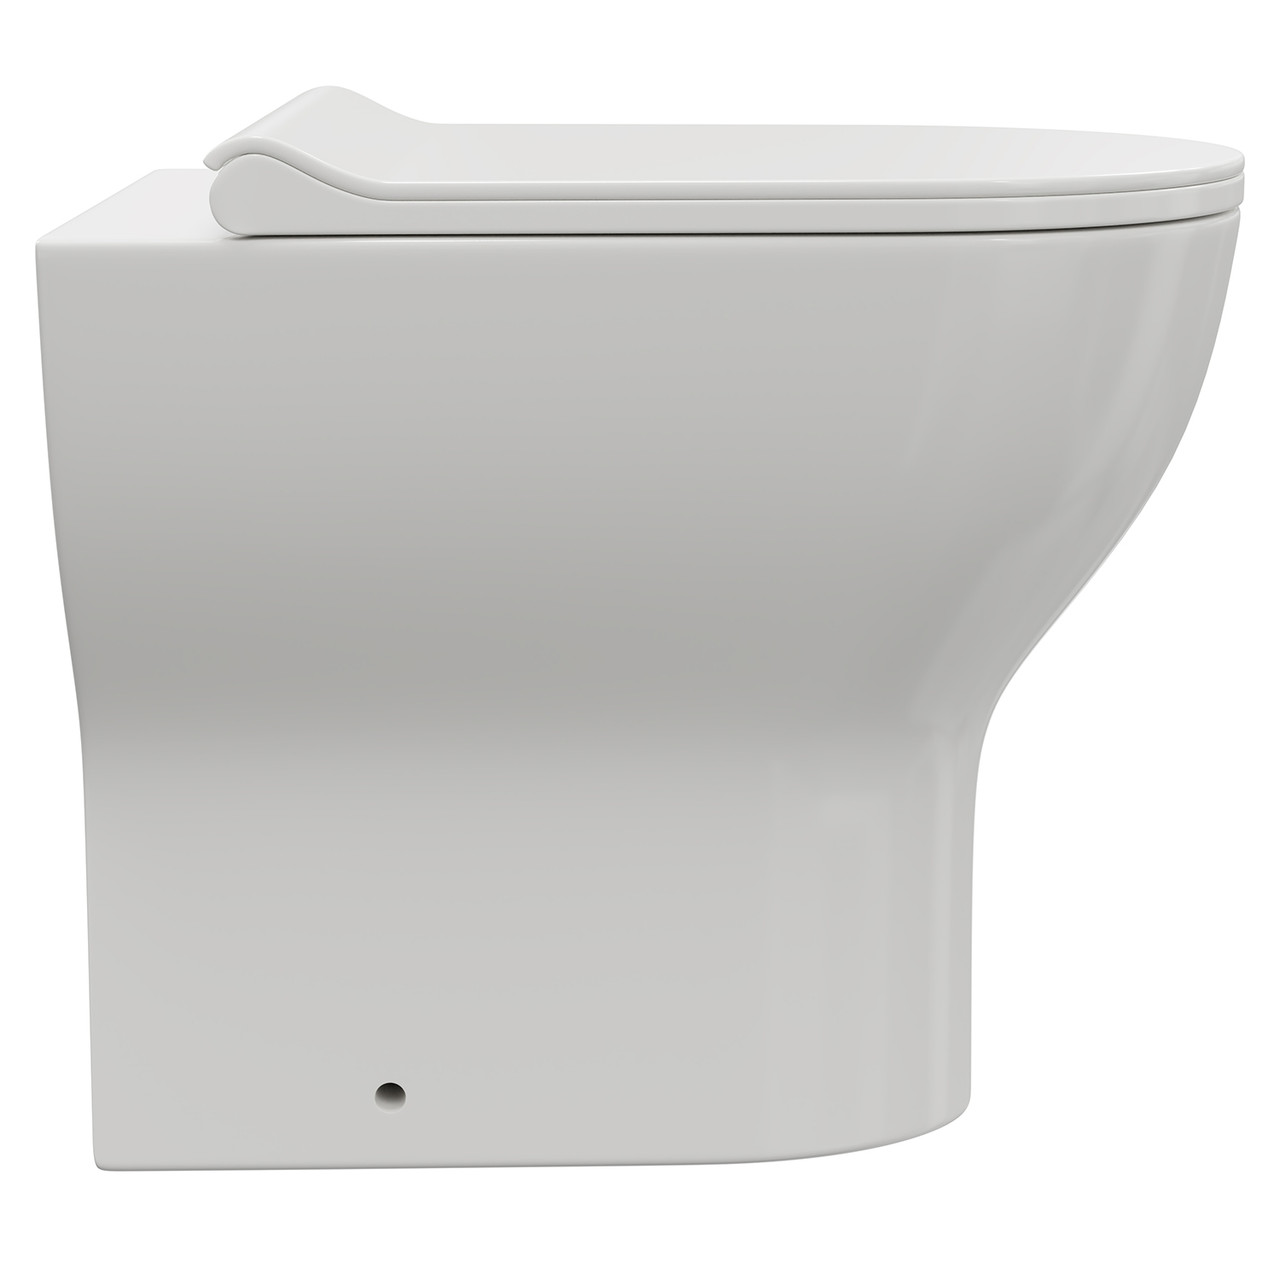 https://cdn11.bigcommerce.com/s-9p1s4pzh1p/images/stencil/1280x1280/products/10373/34936/jubilee_rimless_short_projection_back_to_wall_toilet_pan_with_soft_close_toilet_seat_side__66974.1658322277.jpg?c=1